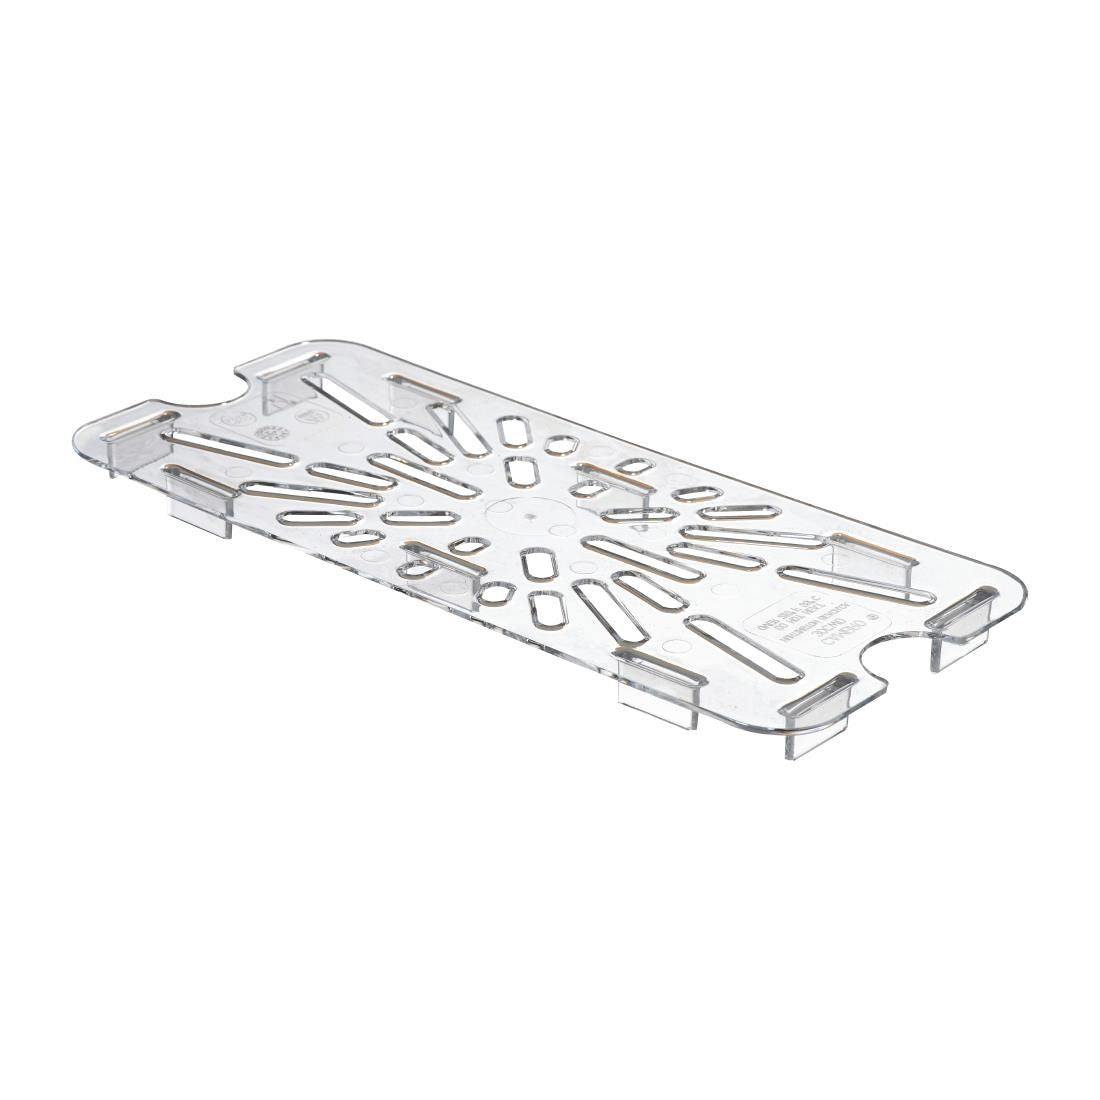 DM712 Cambro Polycarbonate 1/3 Gastronorm Pan Drain Shelf JD Catering Equipment Solutions Ltd